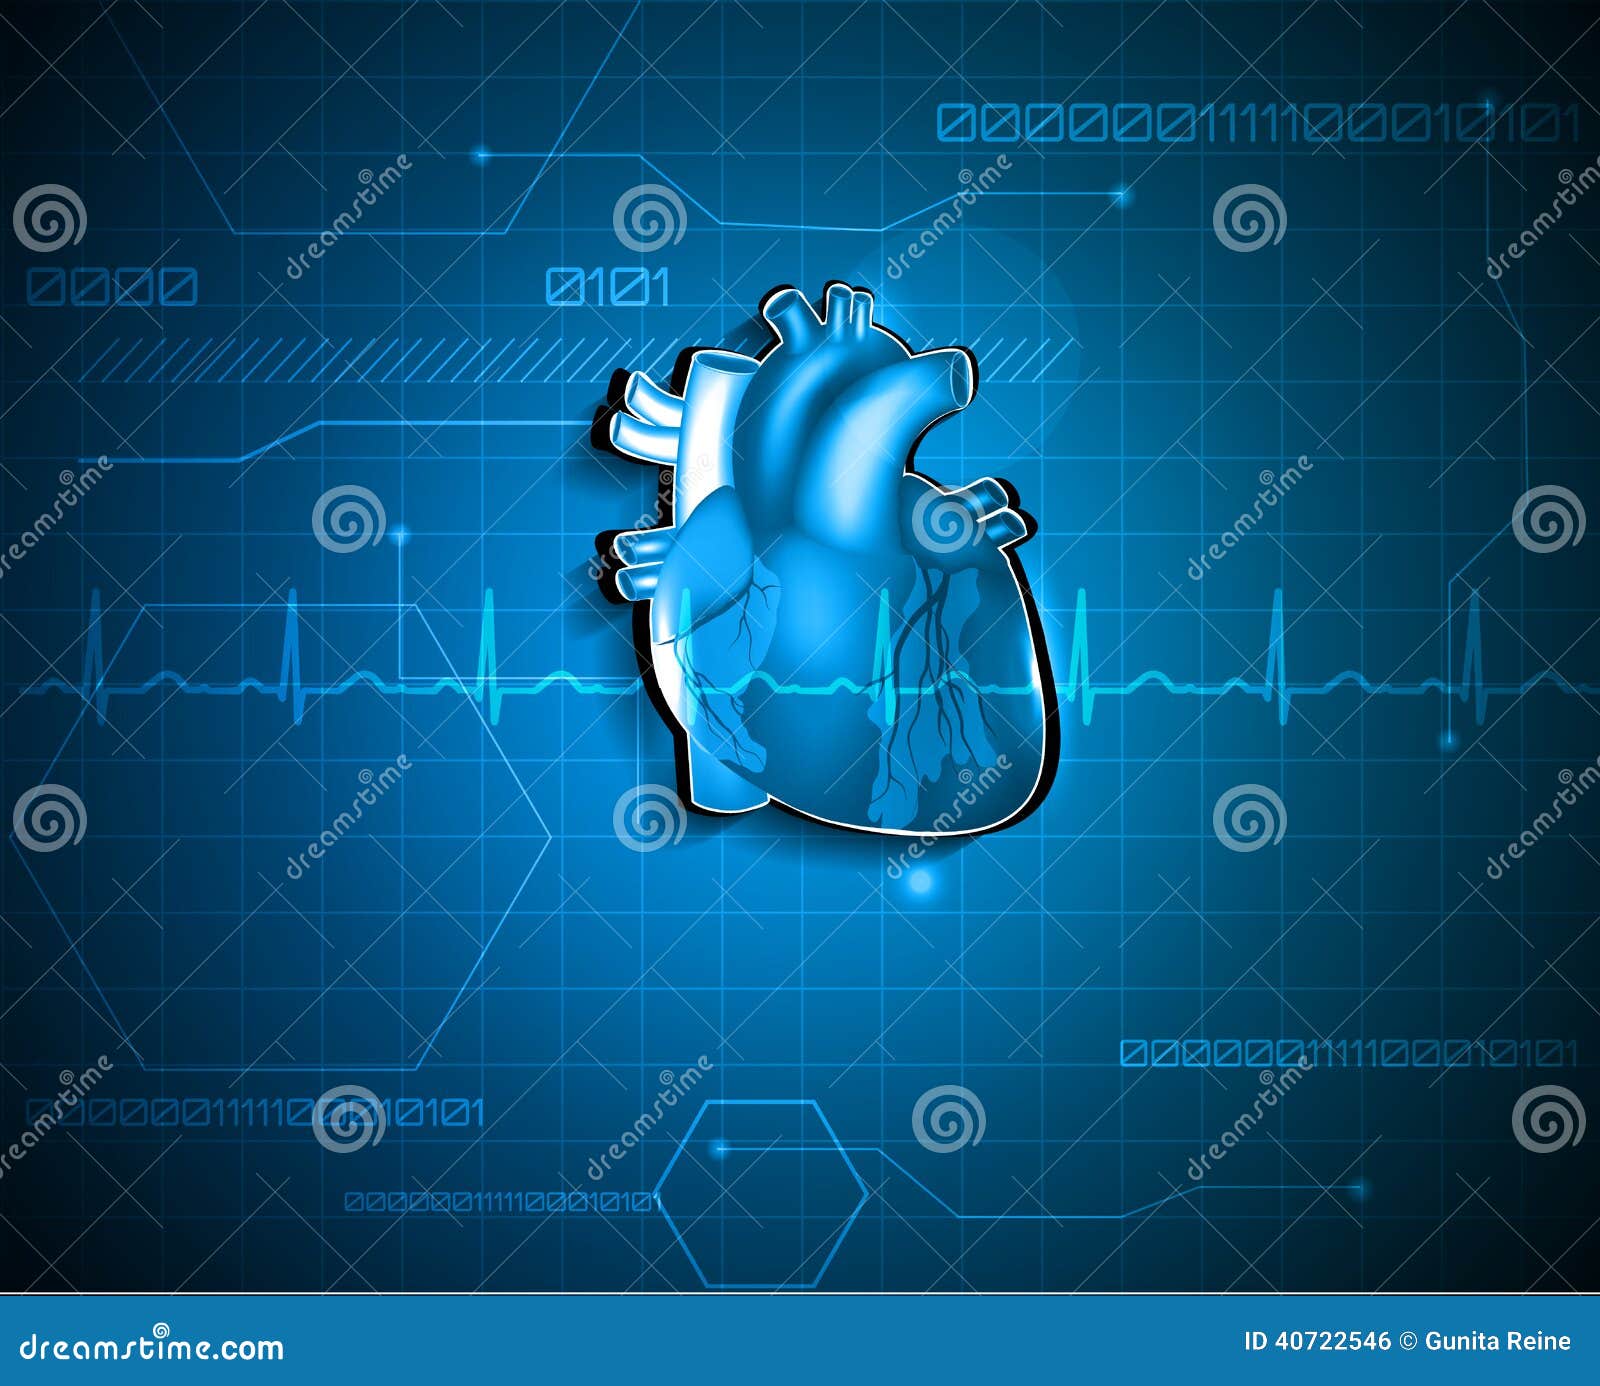 abstract cardiology background